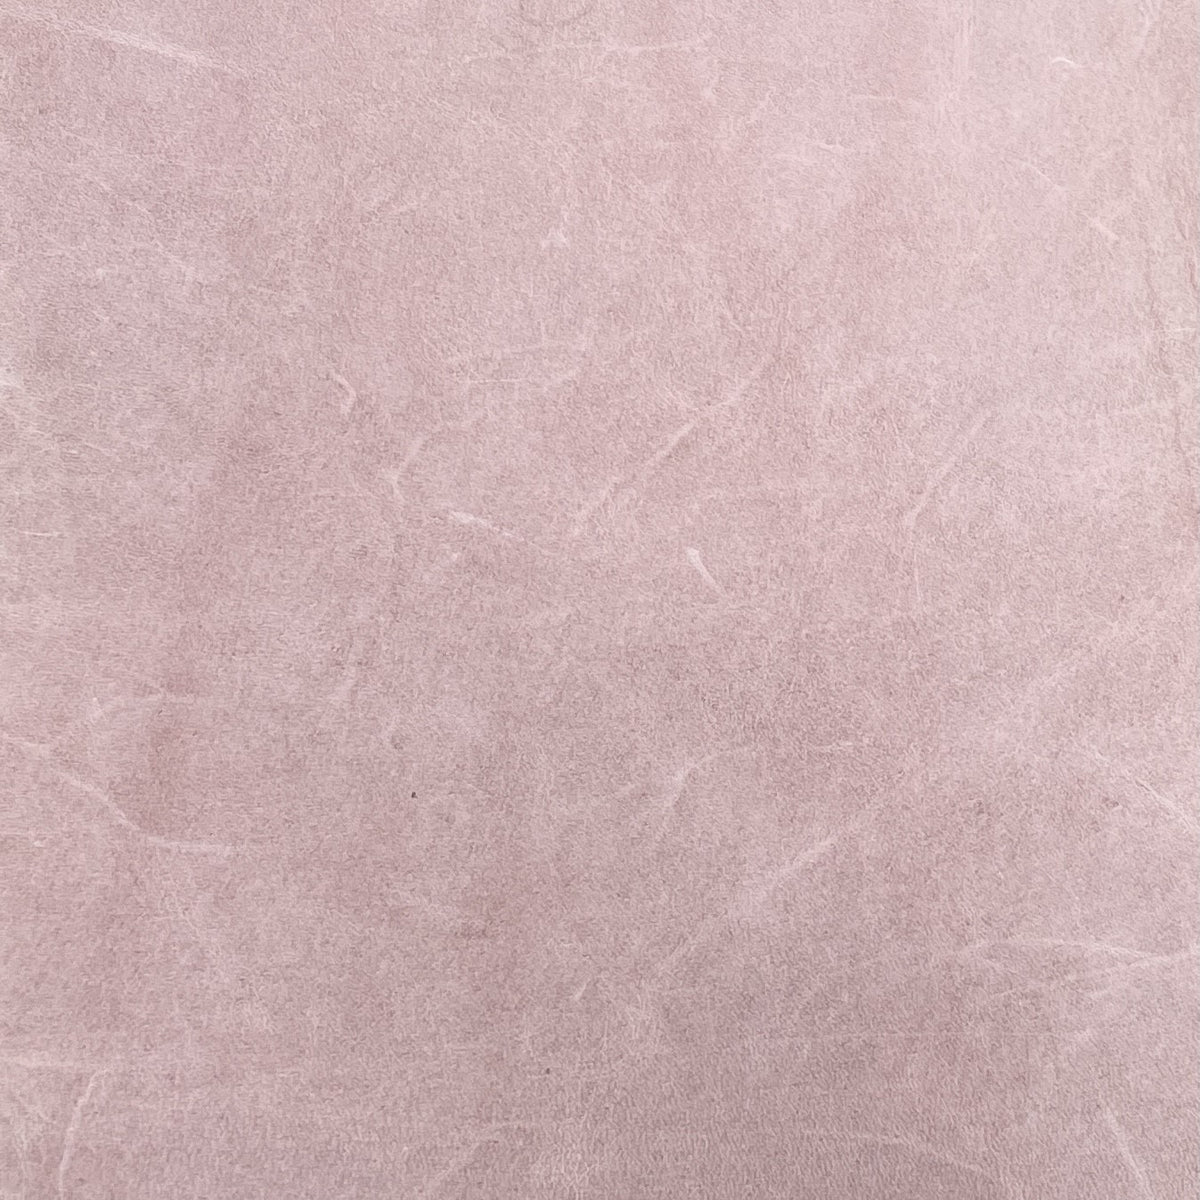 Aniline Upholstery Full Hides (Special) | Light Pink | 1.0 mm | 46 sq.ft | $290 ea.